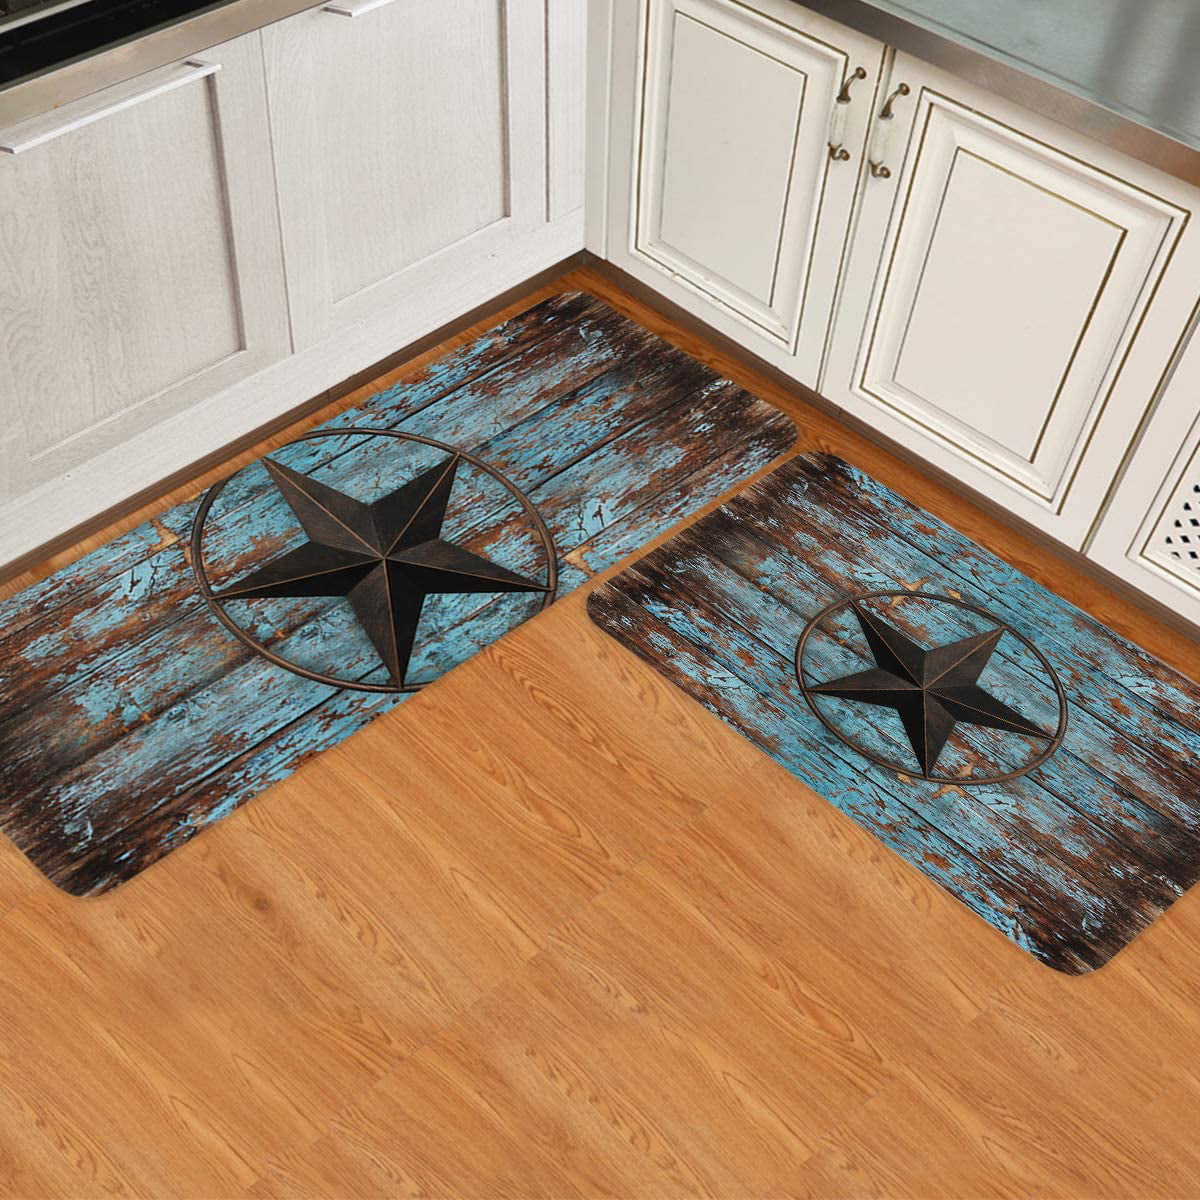 Details about   Kitchen Rugs and Mats Cushioned Anti Fatigue Comfort Runner Mat for Floor Rug of 